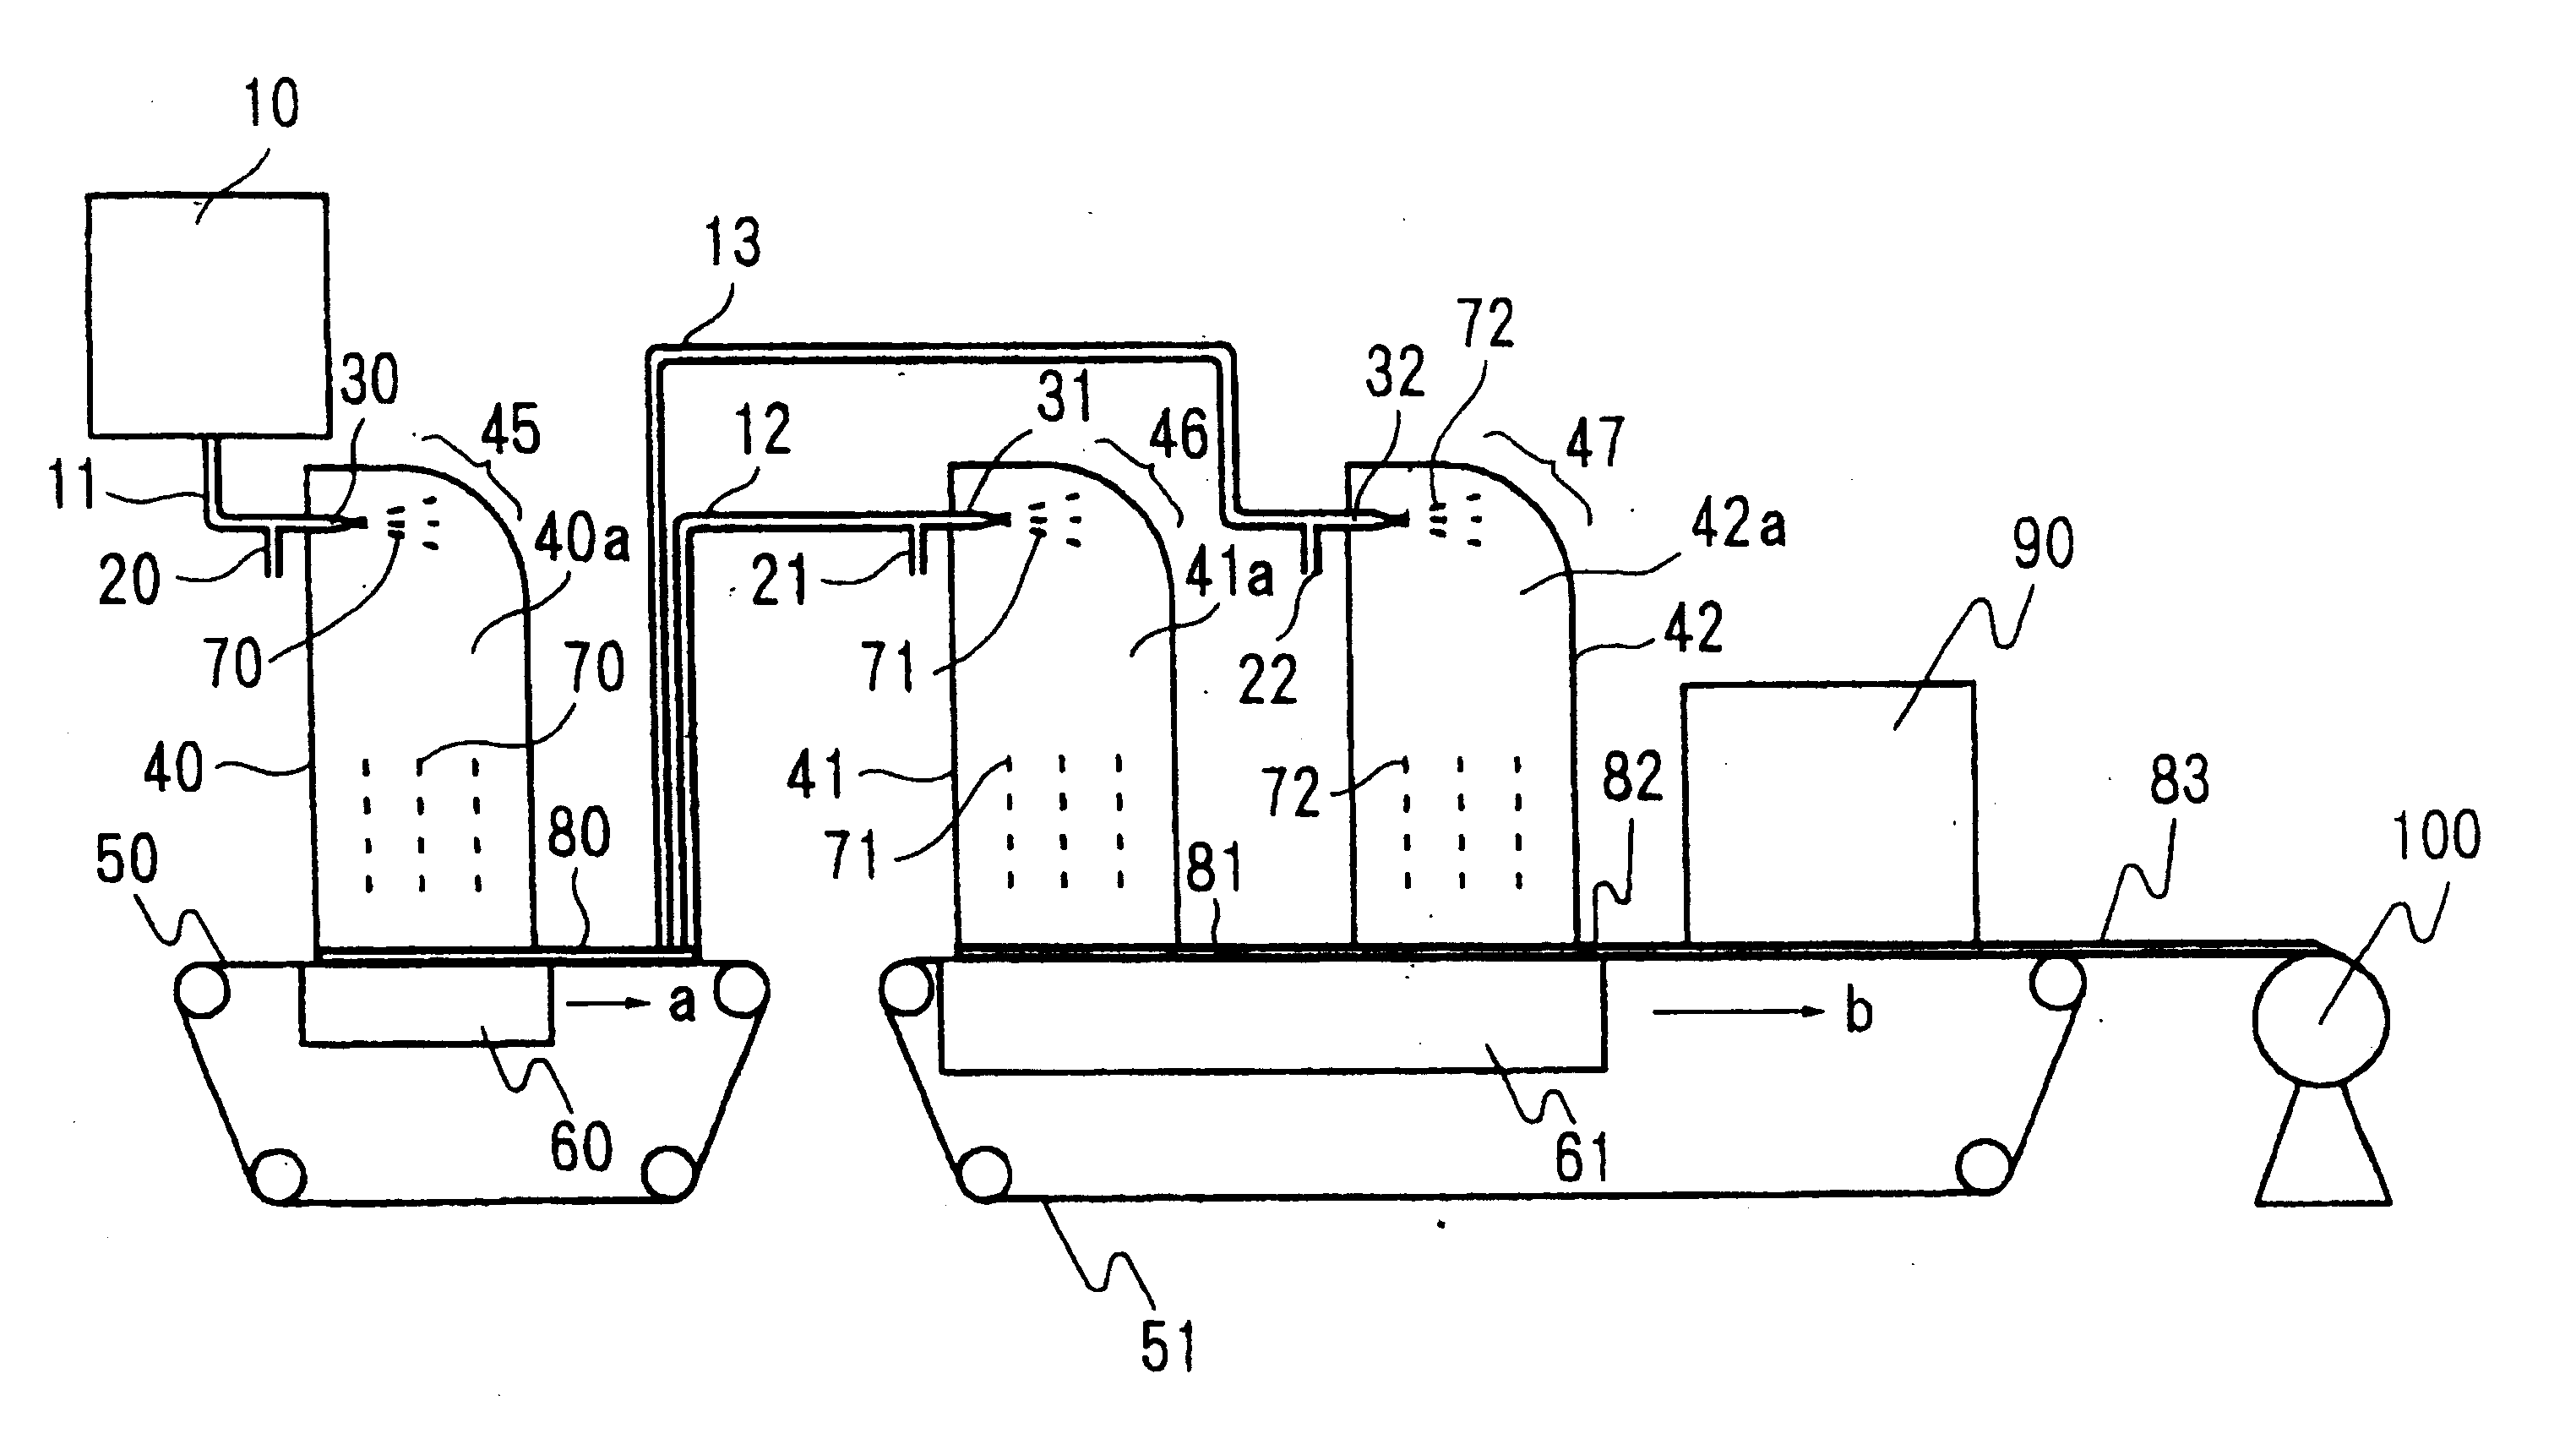 Fine-fibers-dispersed nonwoven fabric, process and apparatus for manufacturing same, and sheet material containing same